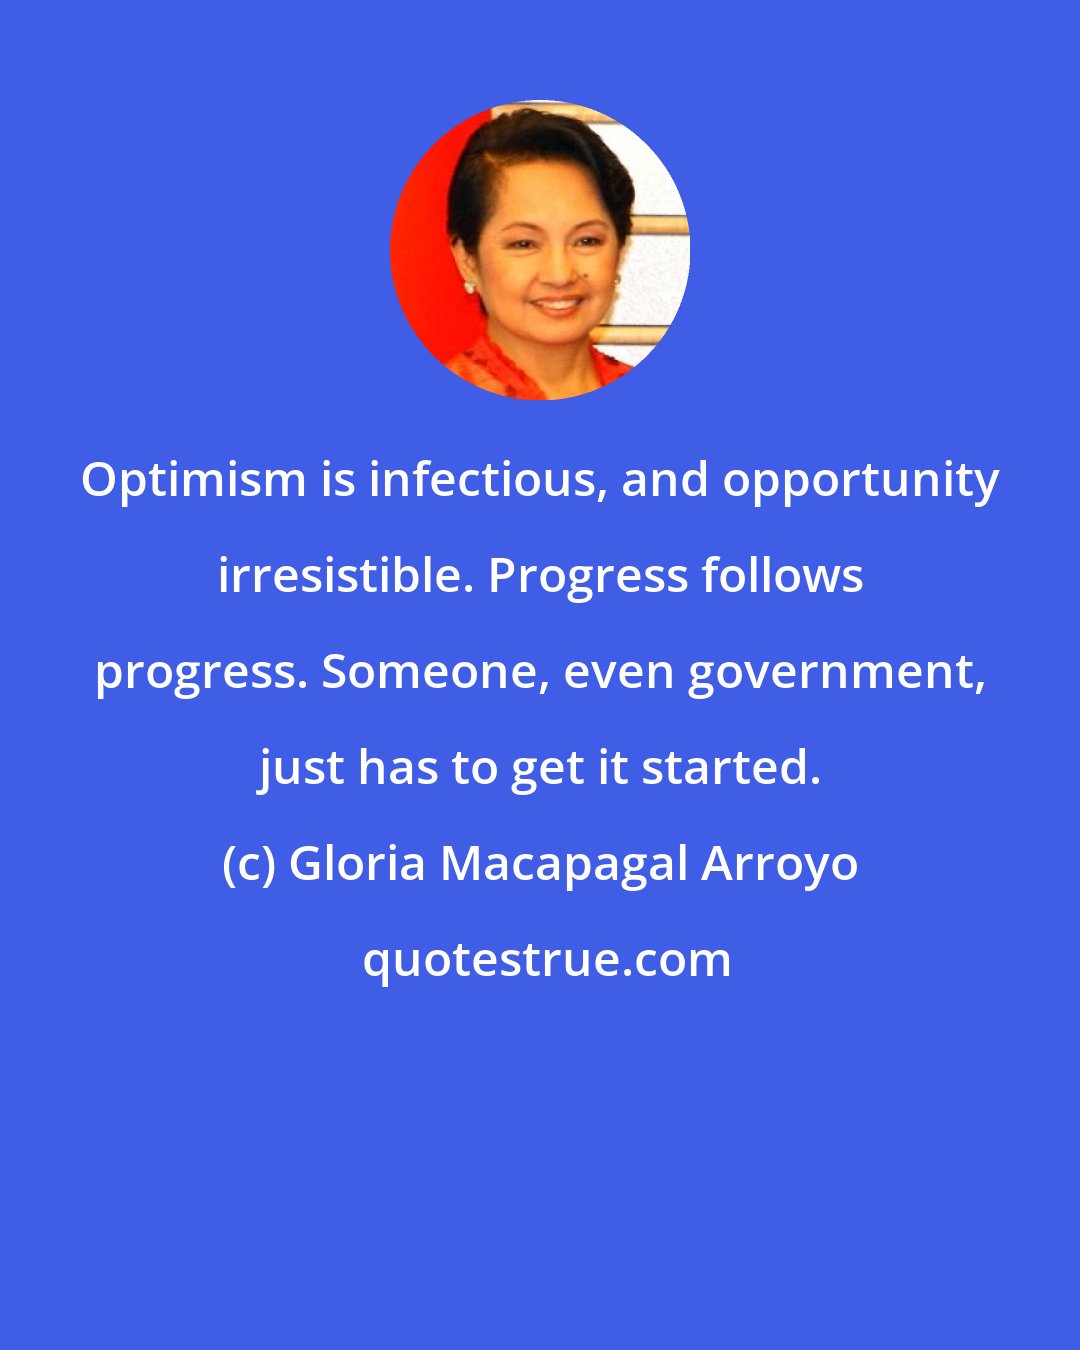 Gloria Macapagal Arroyo: Optimism is infectious, and opportunity irresistible. Progress follows progress. Someone, even government, just has to get it started.